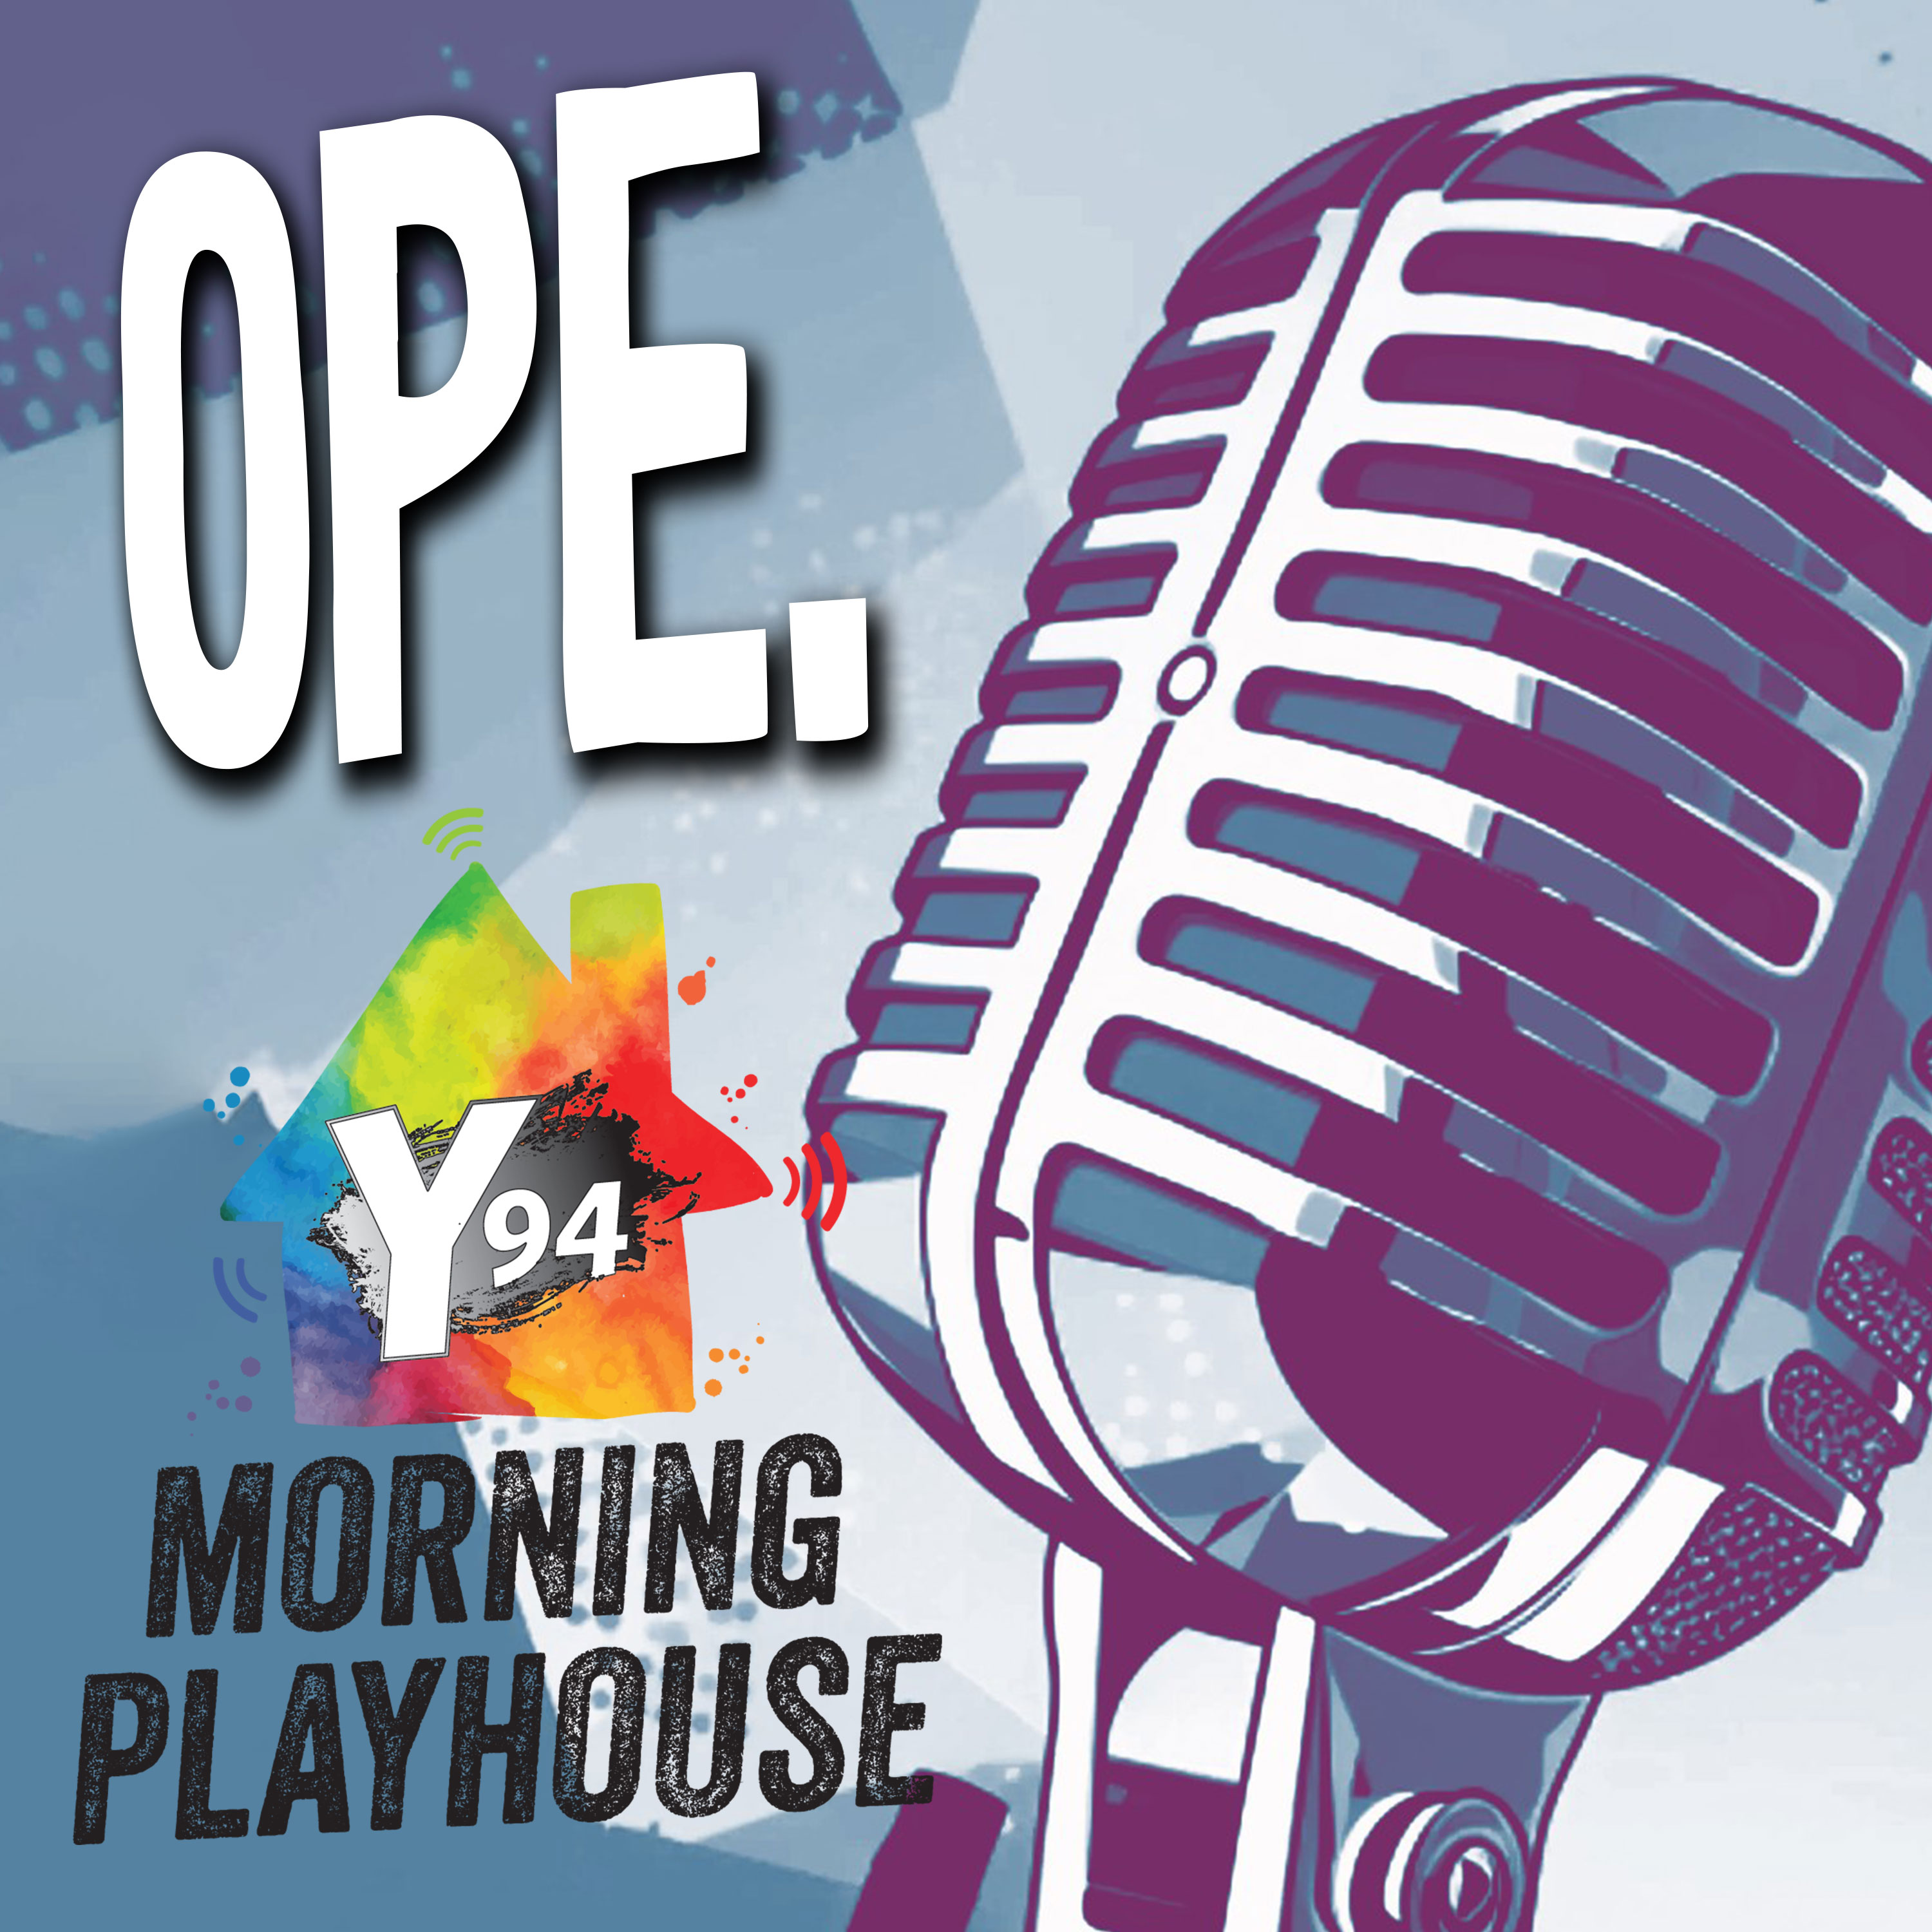 Ope. A Y94 Playhouse Podcast